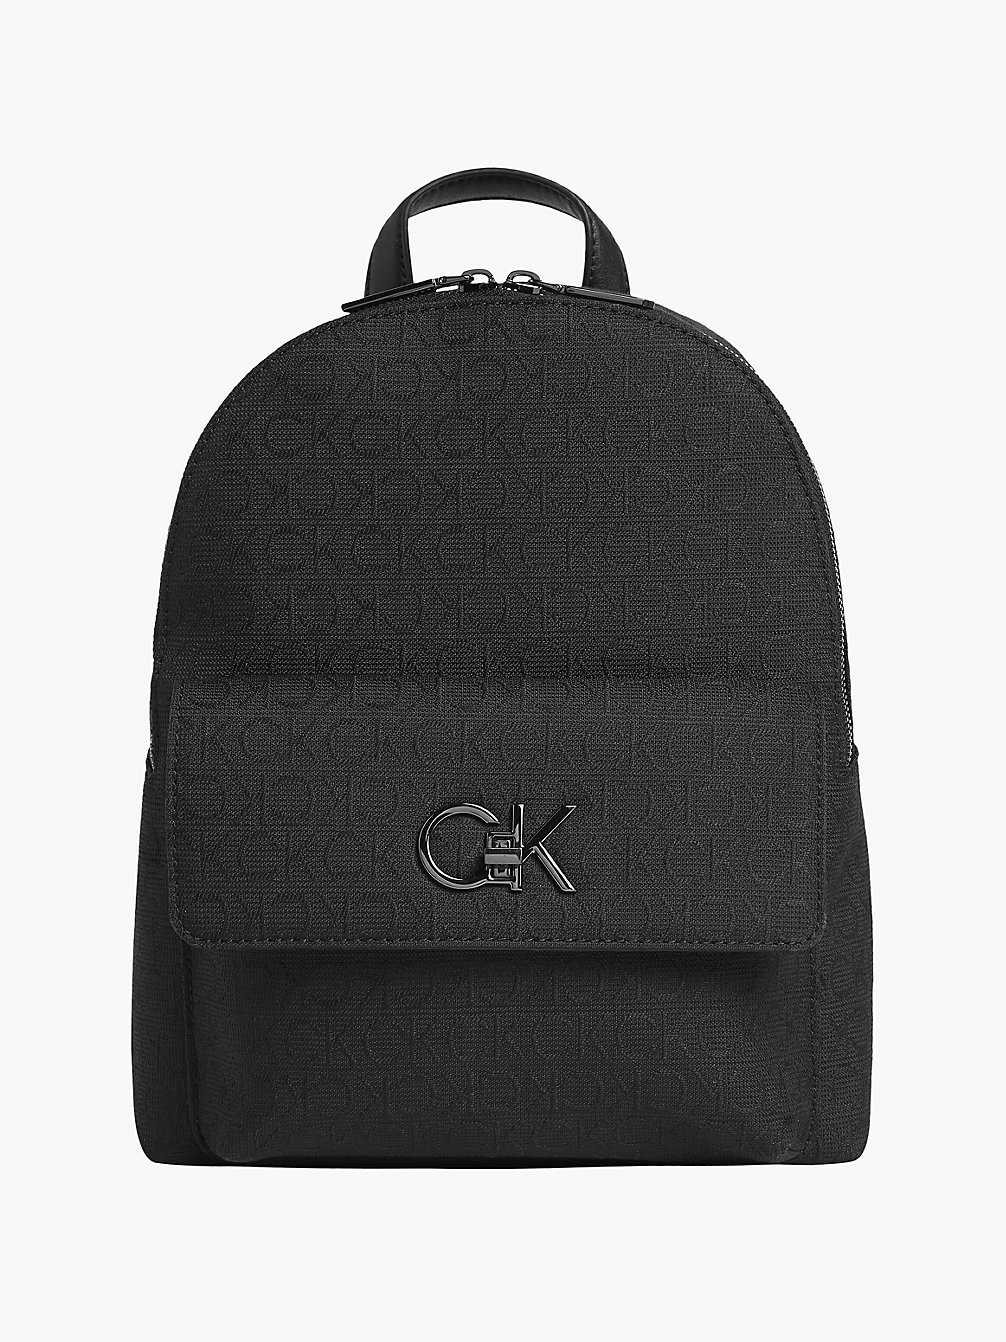 CK BLACK Recycled Logo Jacquard Backpack undefined women Calvin Klein